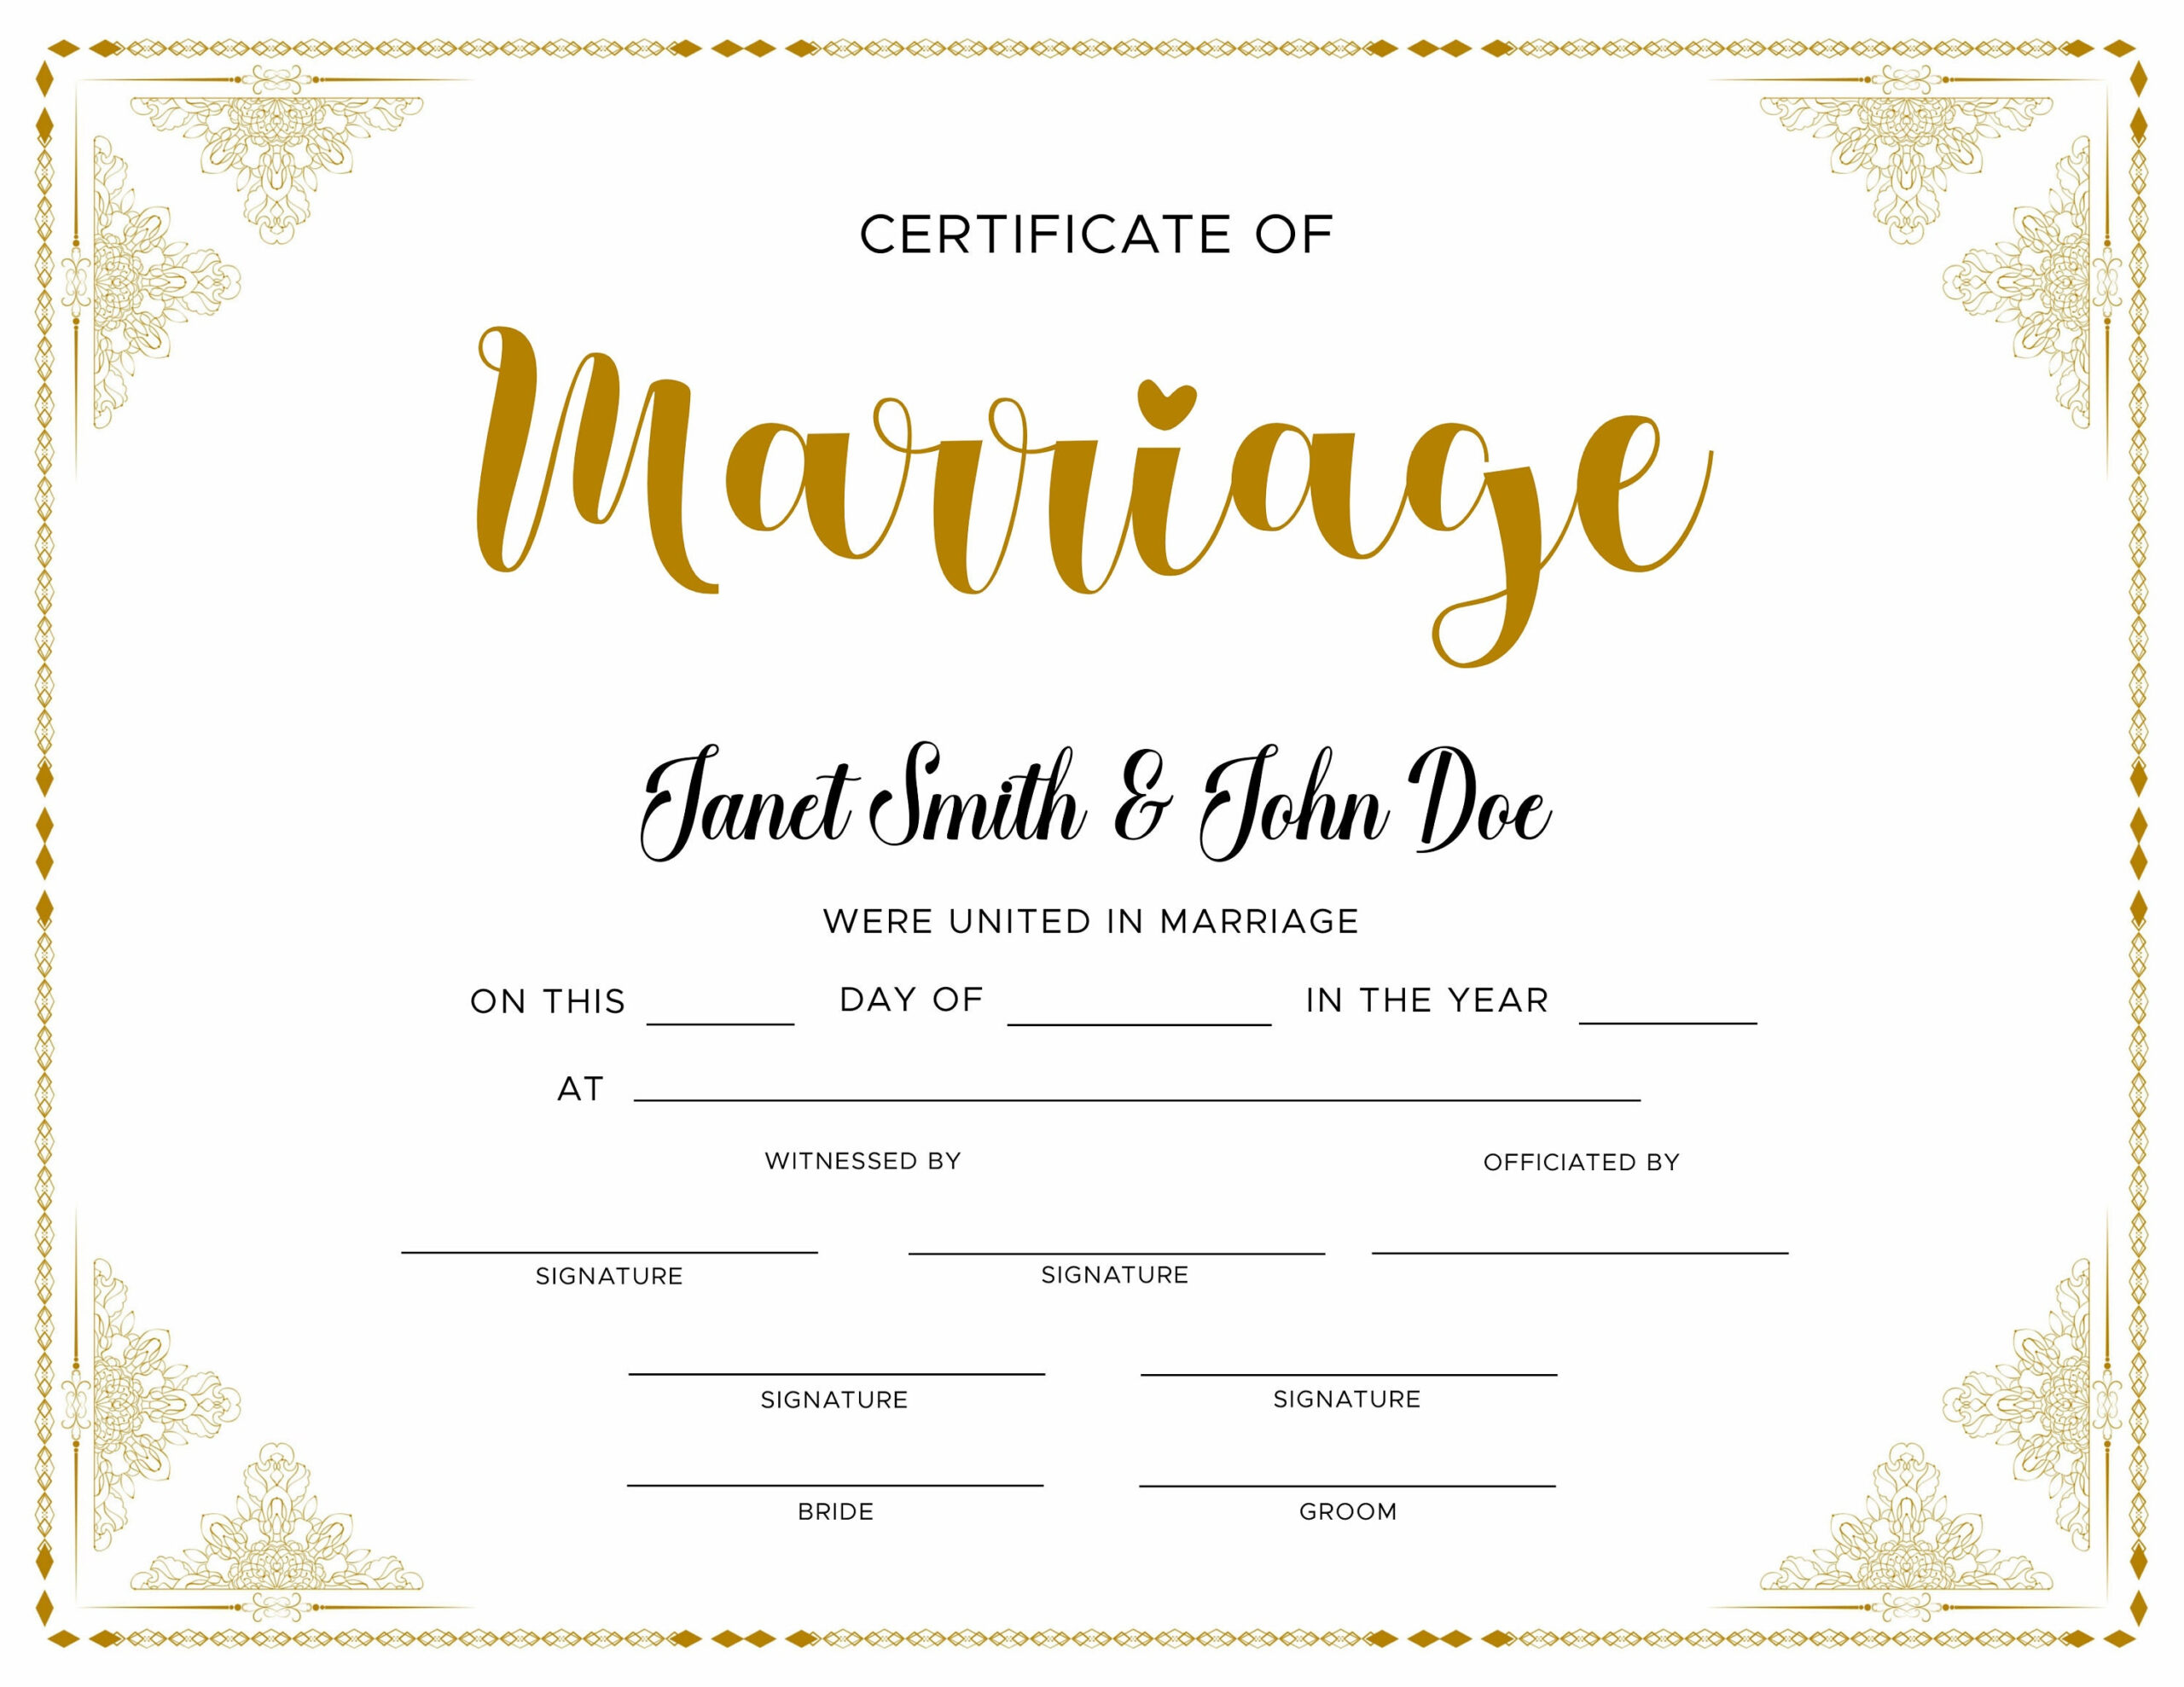 Editable Marriage Certificate. Editable Printable Wedding Certificate  Template. Elegant Certificate of Marriage